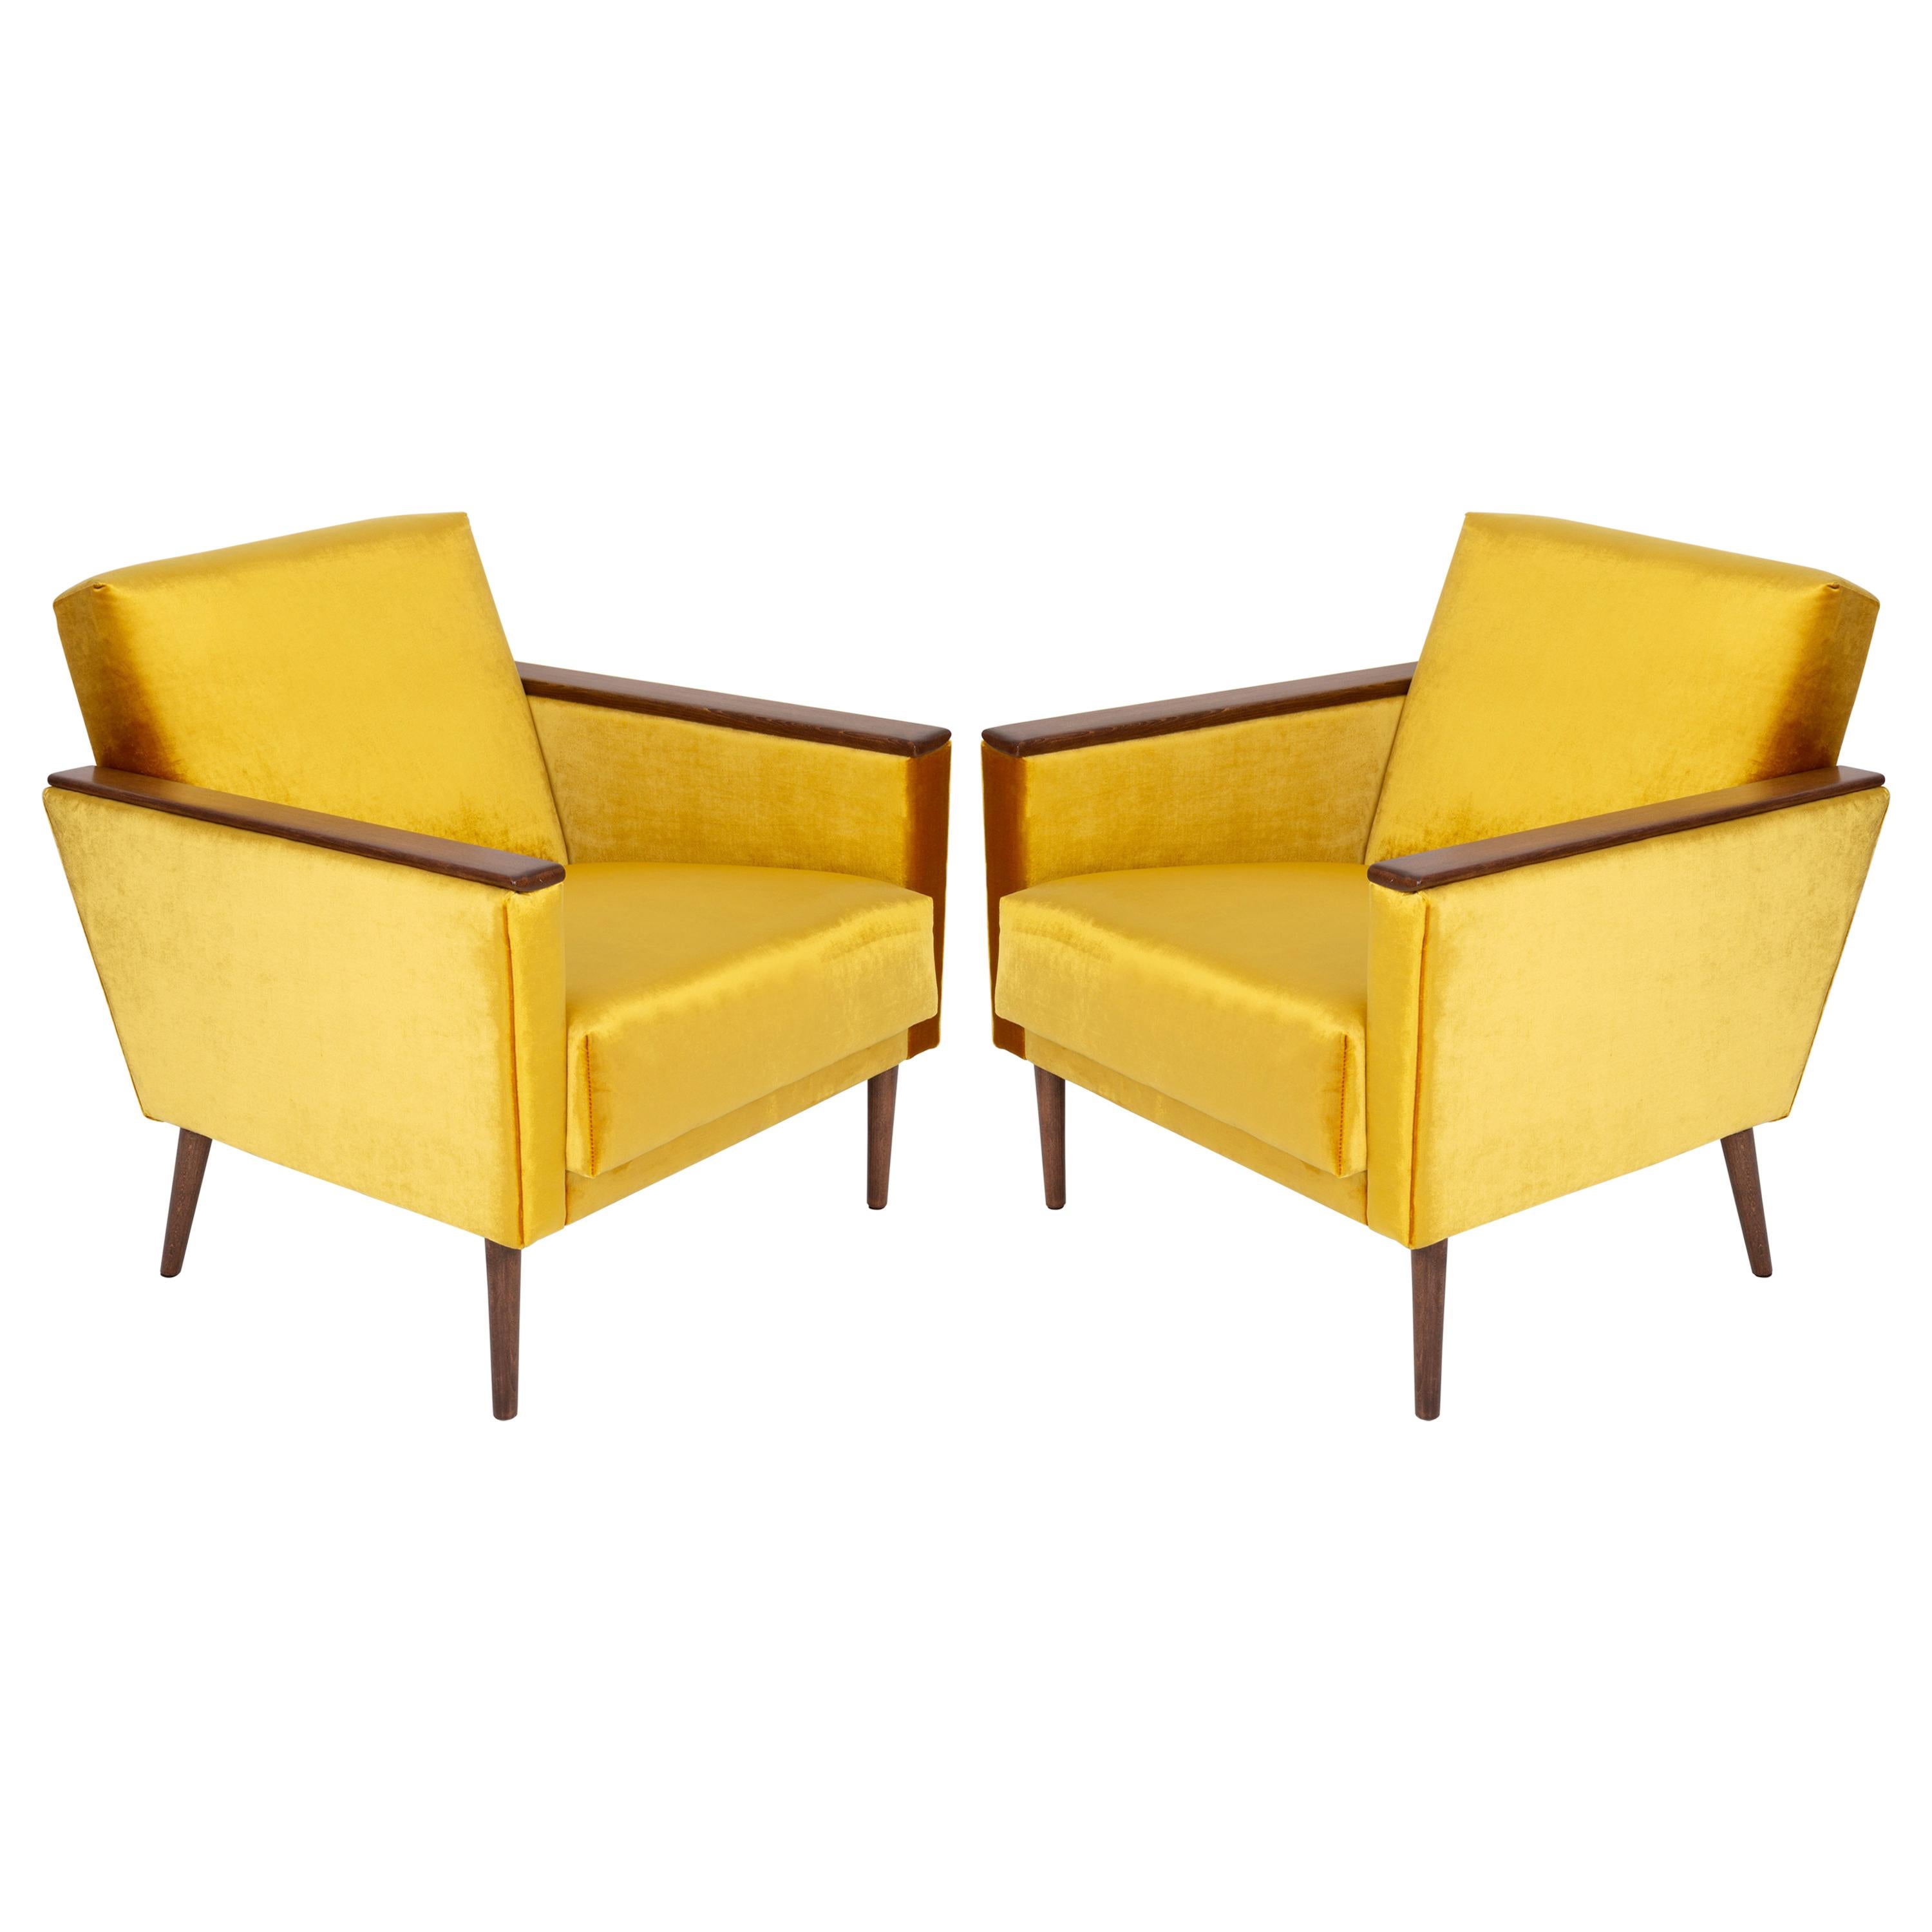 Pair of Midcentury Yellow Mustard Club Armchairs, 1960s, DDR, Germany